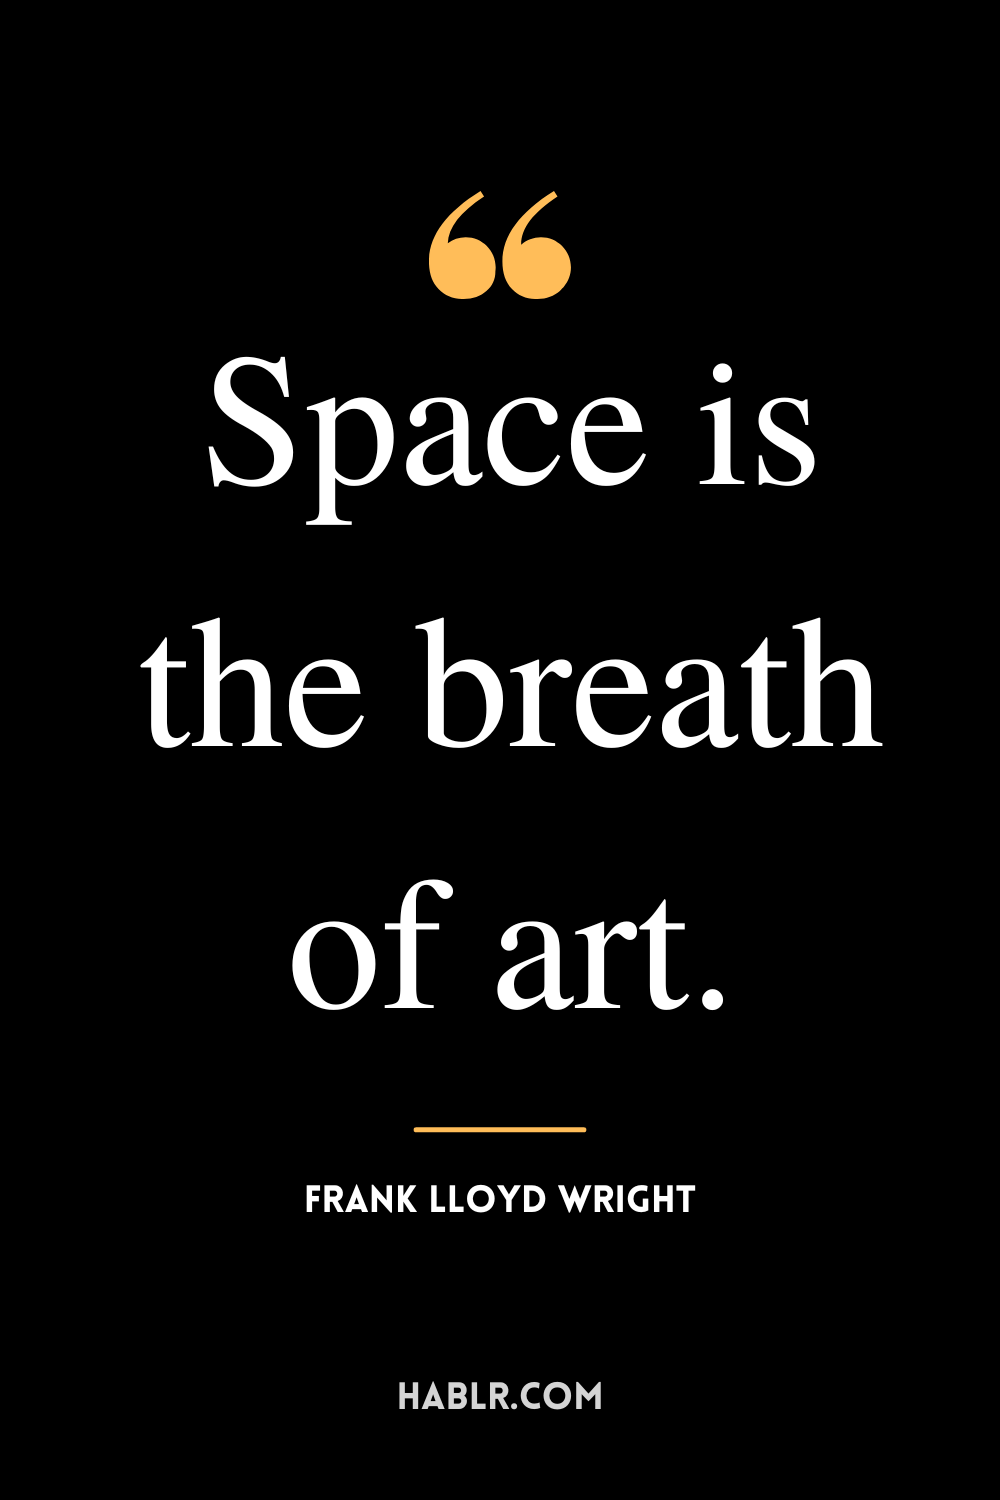 "Space is the breath of art." -Frank Lloyd Wright